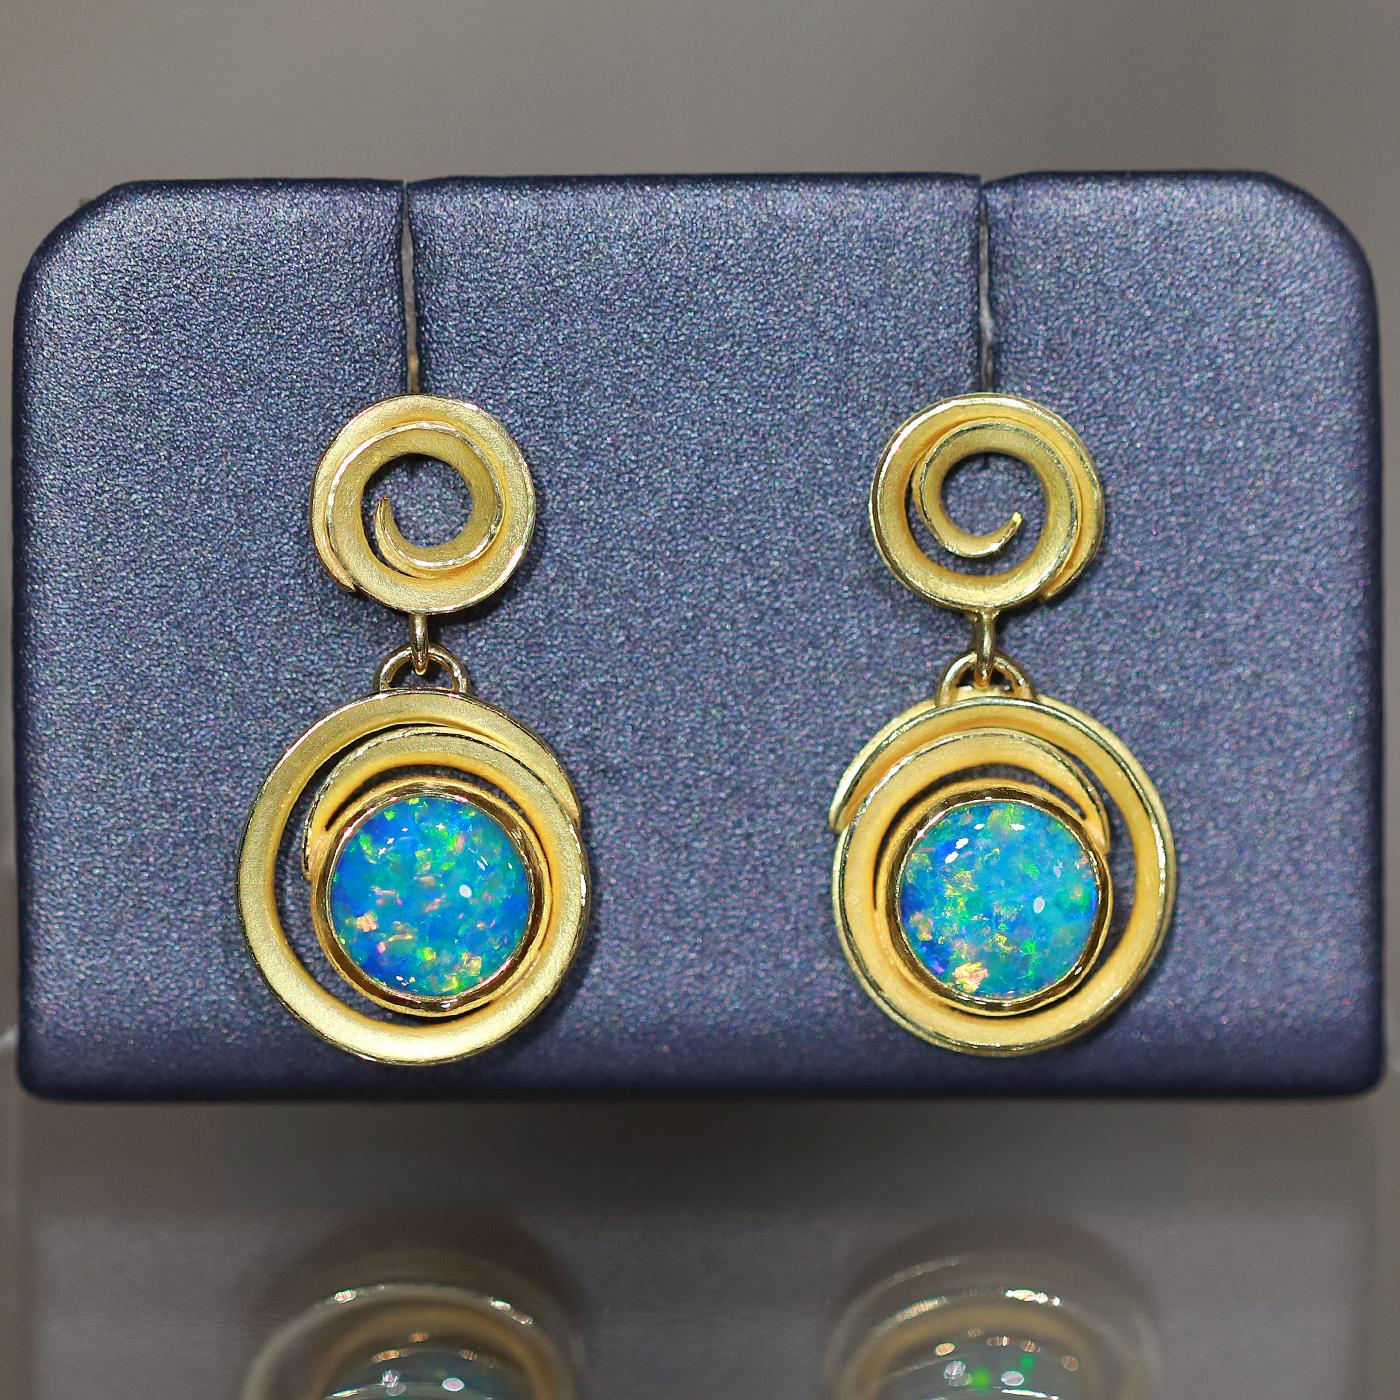 One of a Kind Double Swirl Drop Earrings hand-fabricated in signature-finished 18k yellow gold by award-winning jewelry maker Barbara Heinrich featuring a spectacular pair of top quality round vivid blue Australian opal doublet cabochons totaling